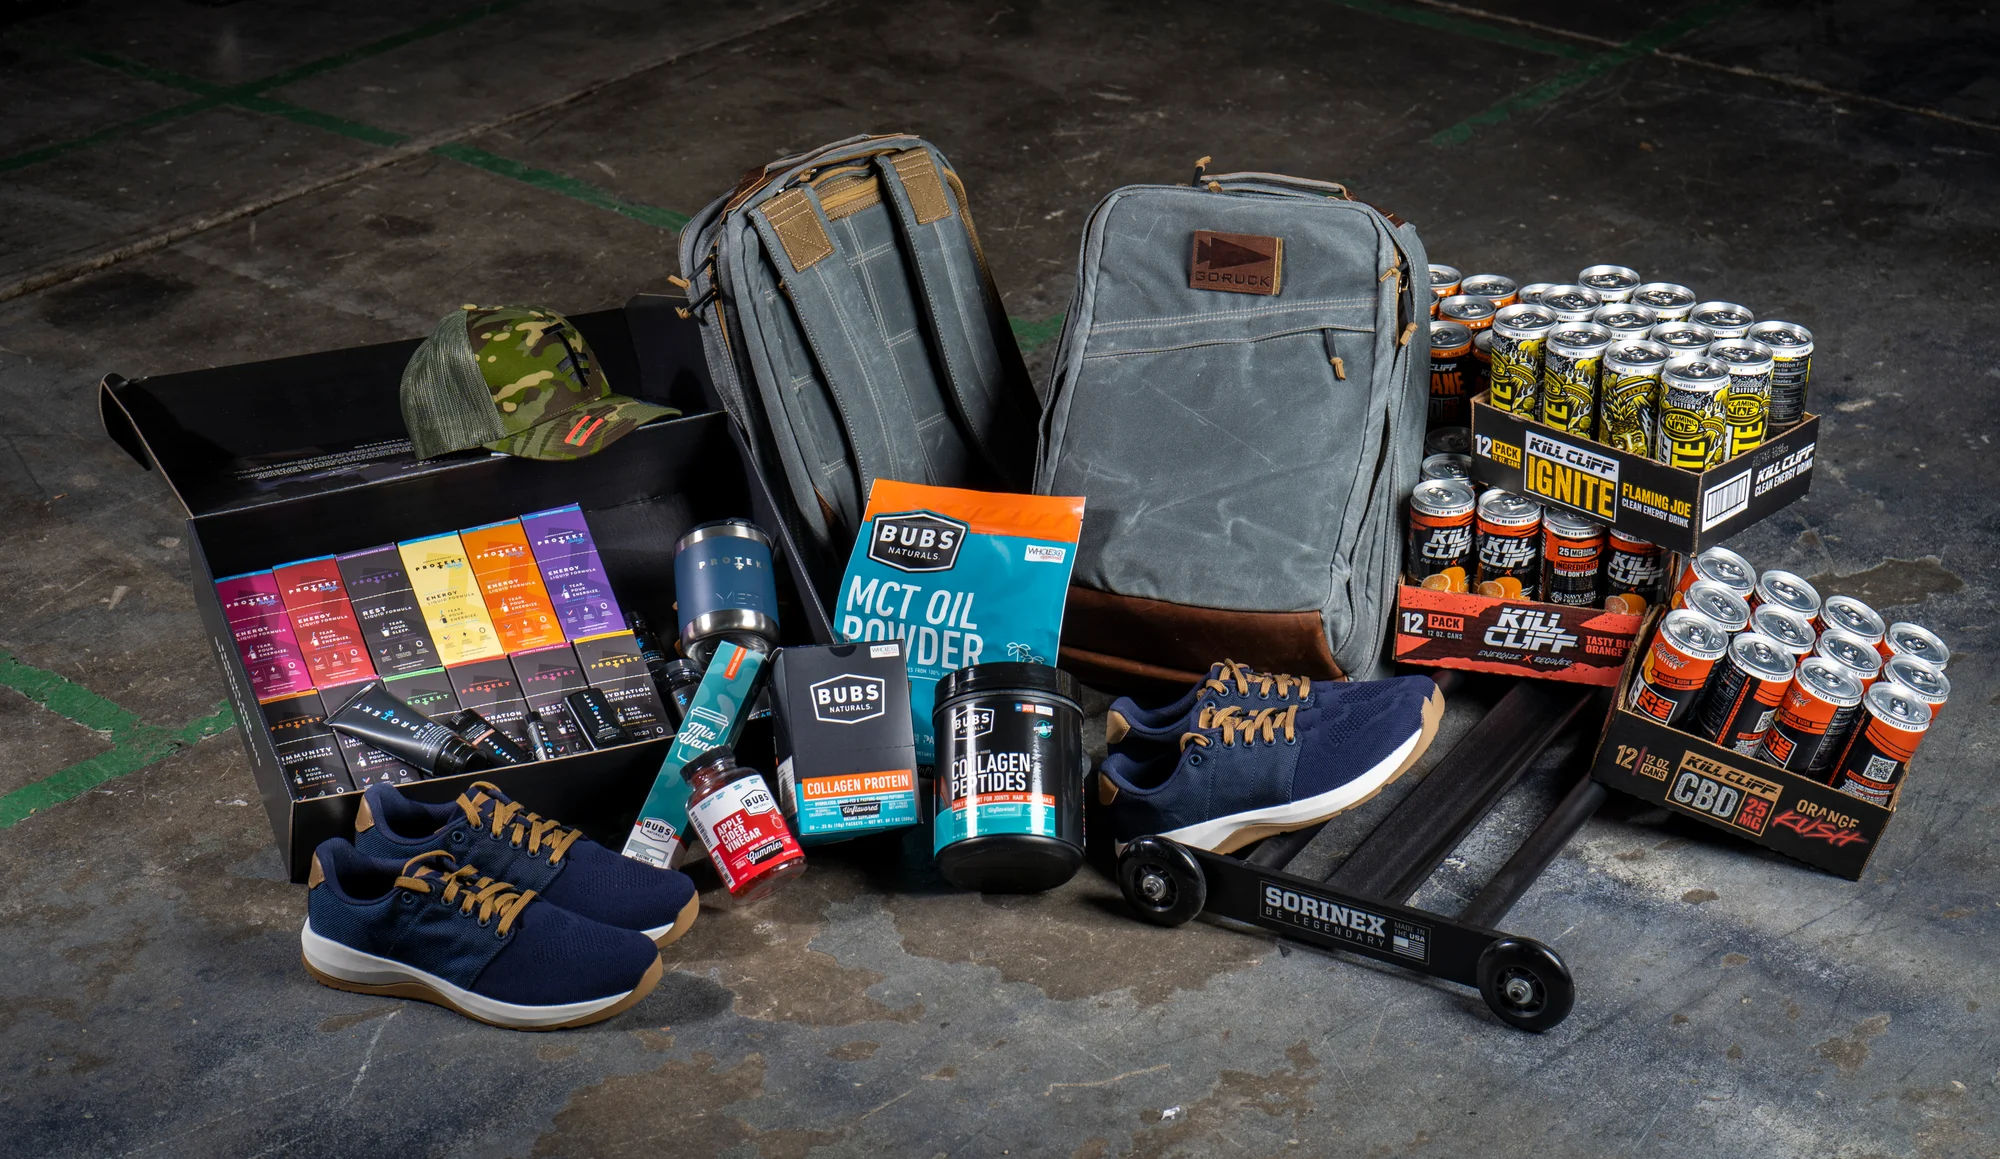 Black Rifle Coffee Company has partnered with GORUCK for a VIP giveaway to the GORUCK Sandlot JAX Fitness Festival on April 21-23, 2023. Photo courtesy of Black Rifle Coffee Company.